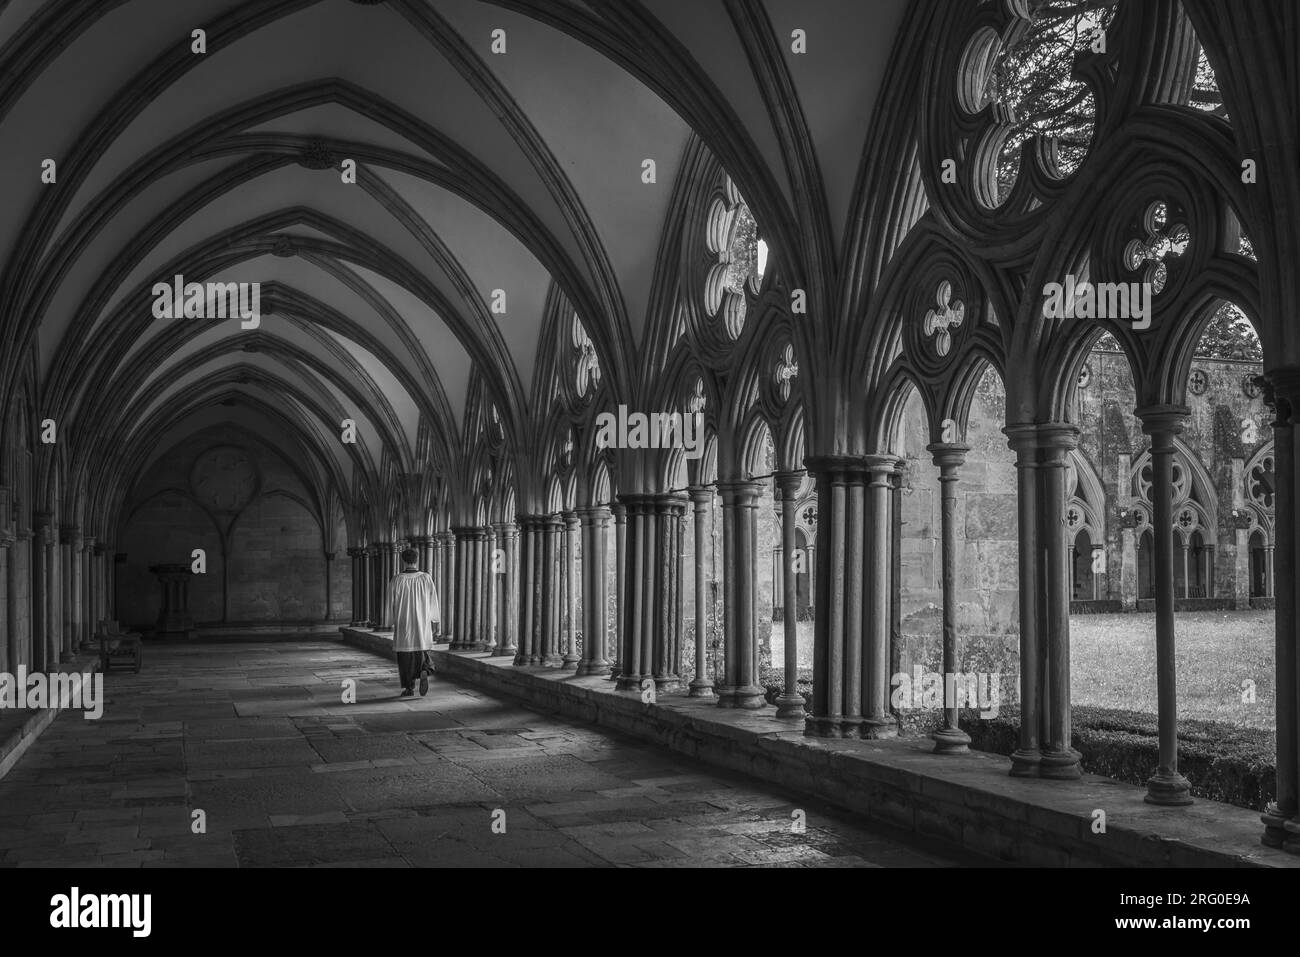 Black and white of Salisbury Cathedral Cloister arcade, the largest in the UK, Salisbury, Wiltshire, England, UK Stock Photo